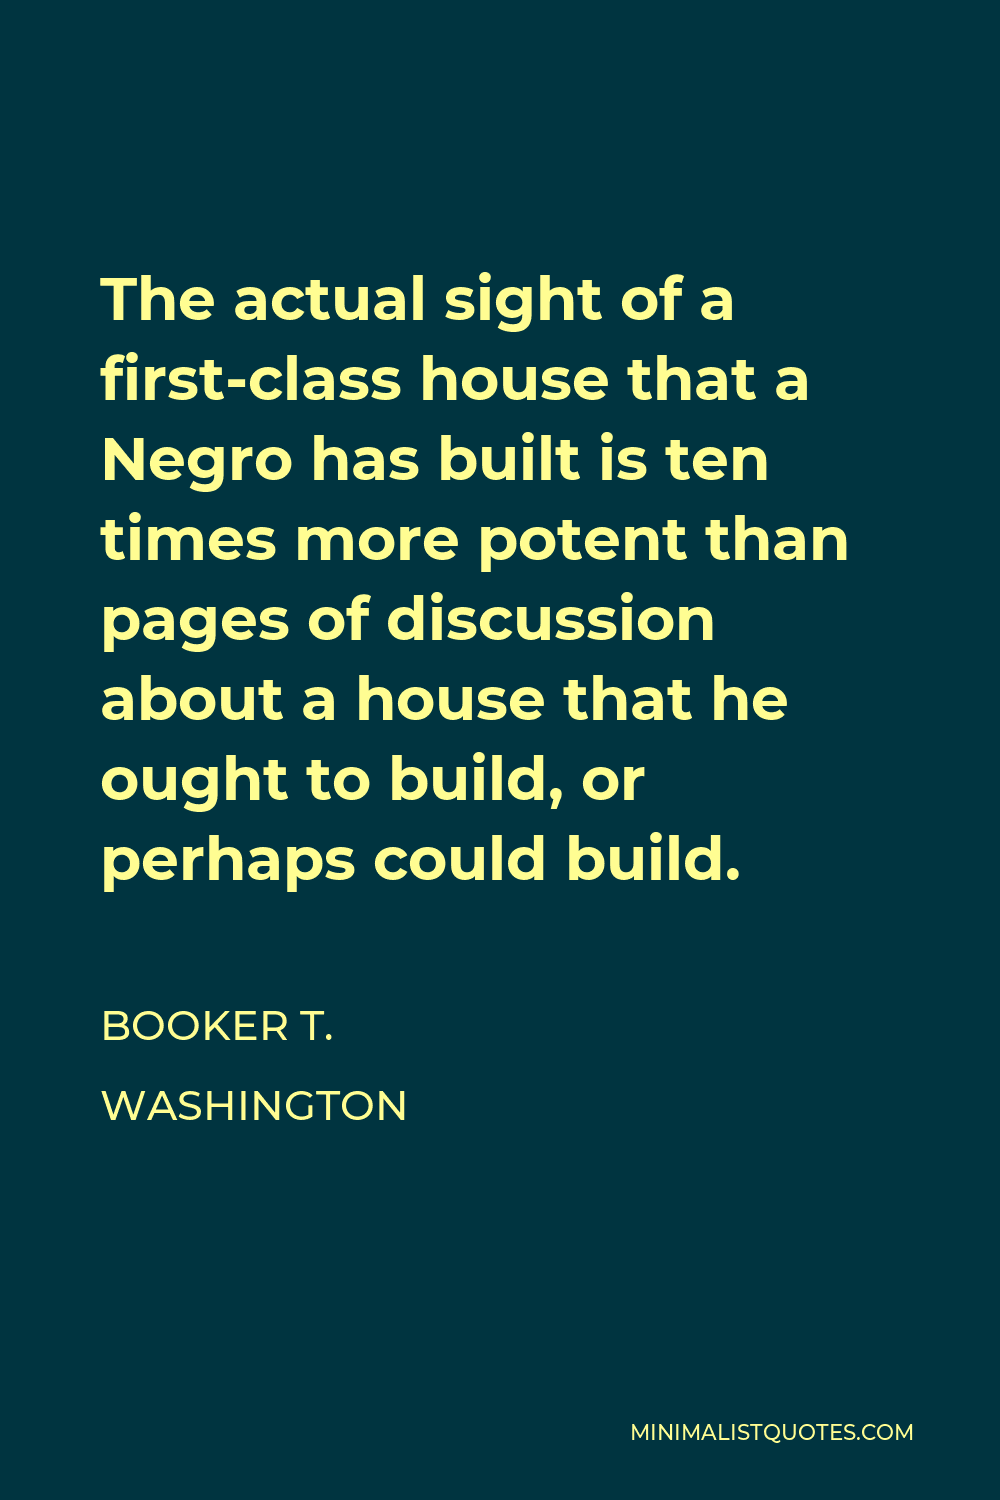 Booker T. Washington Quote - The actual sight of a first-class house that a Negro has built is ten times more potent than pages of discussion about a house that he ought to build, or perhaps could build.